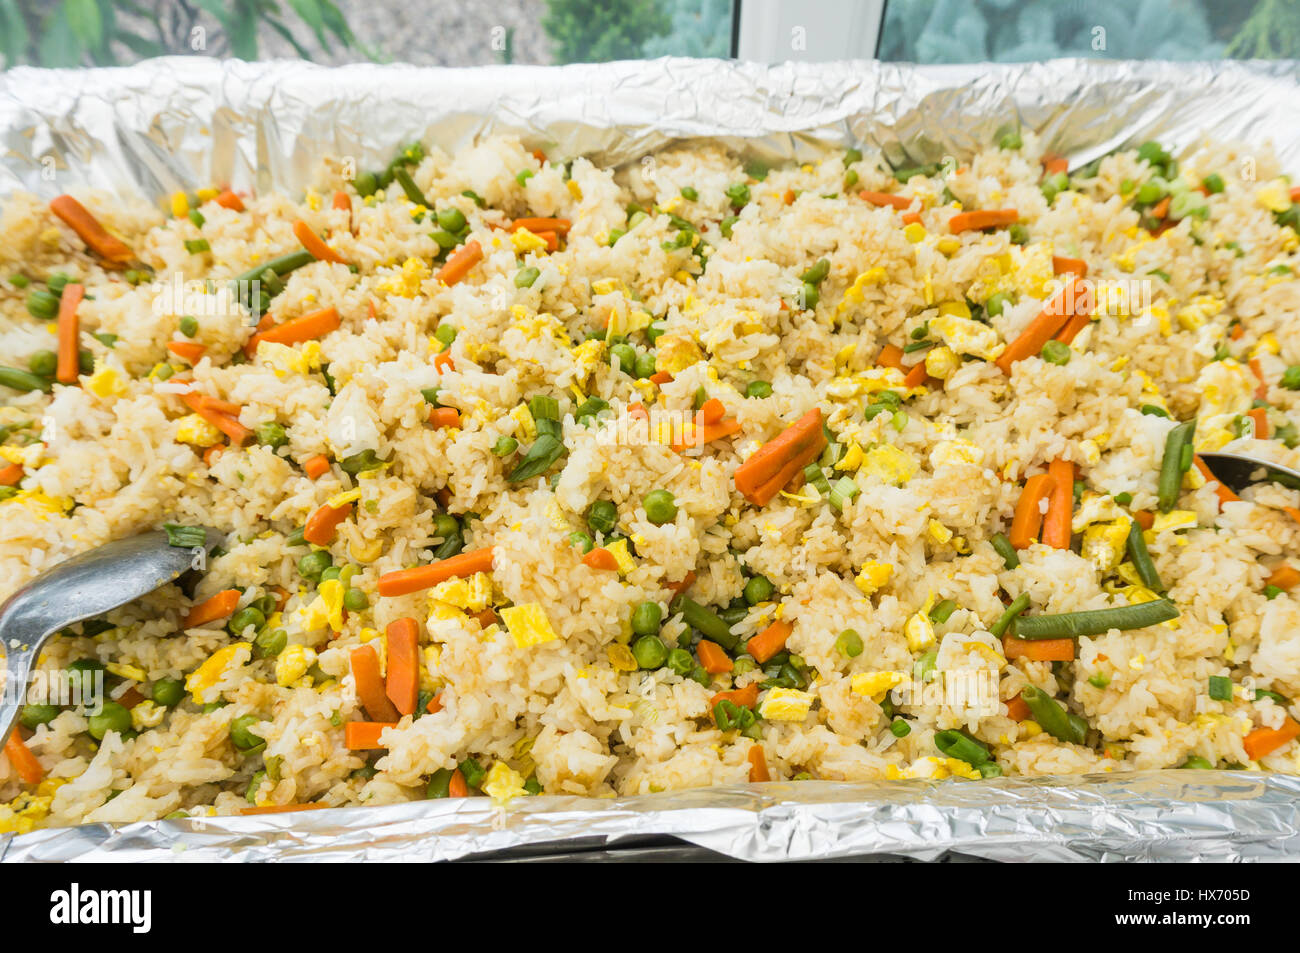 Fried rice vegetables Stock Photo